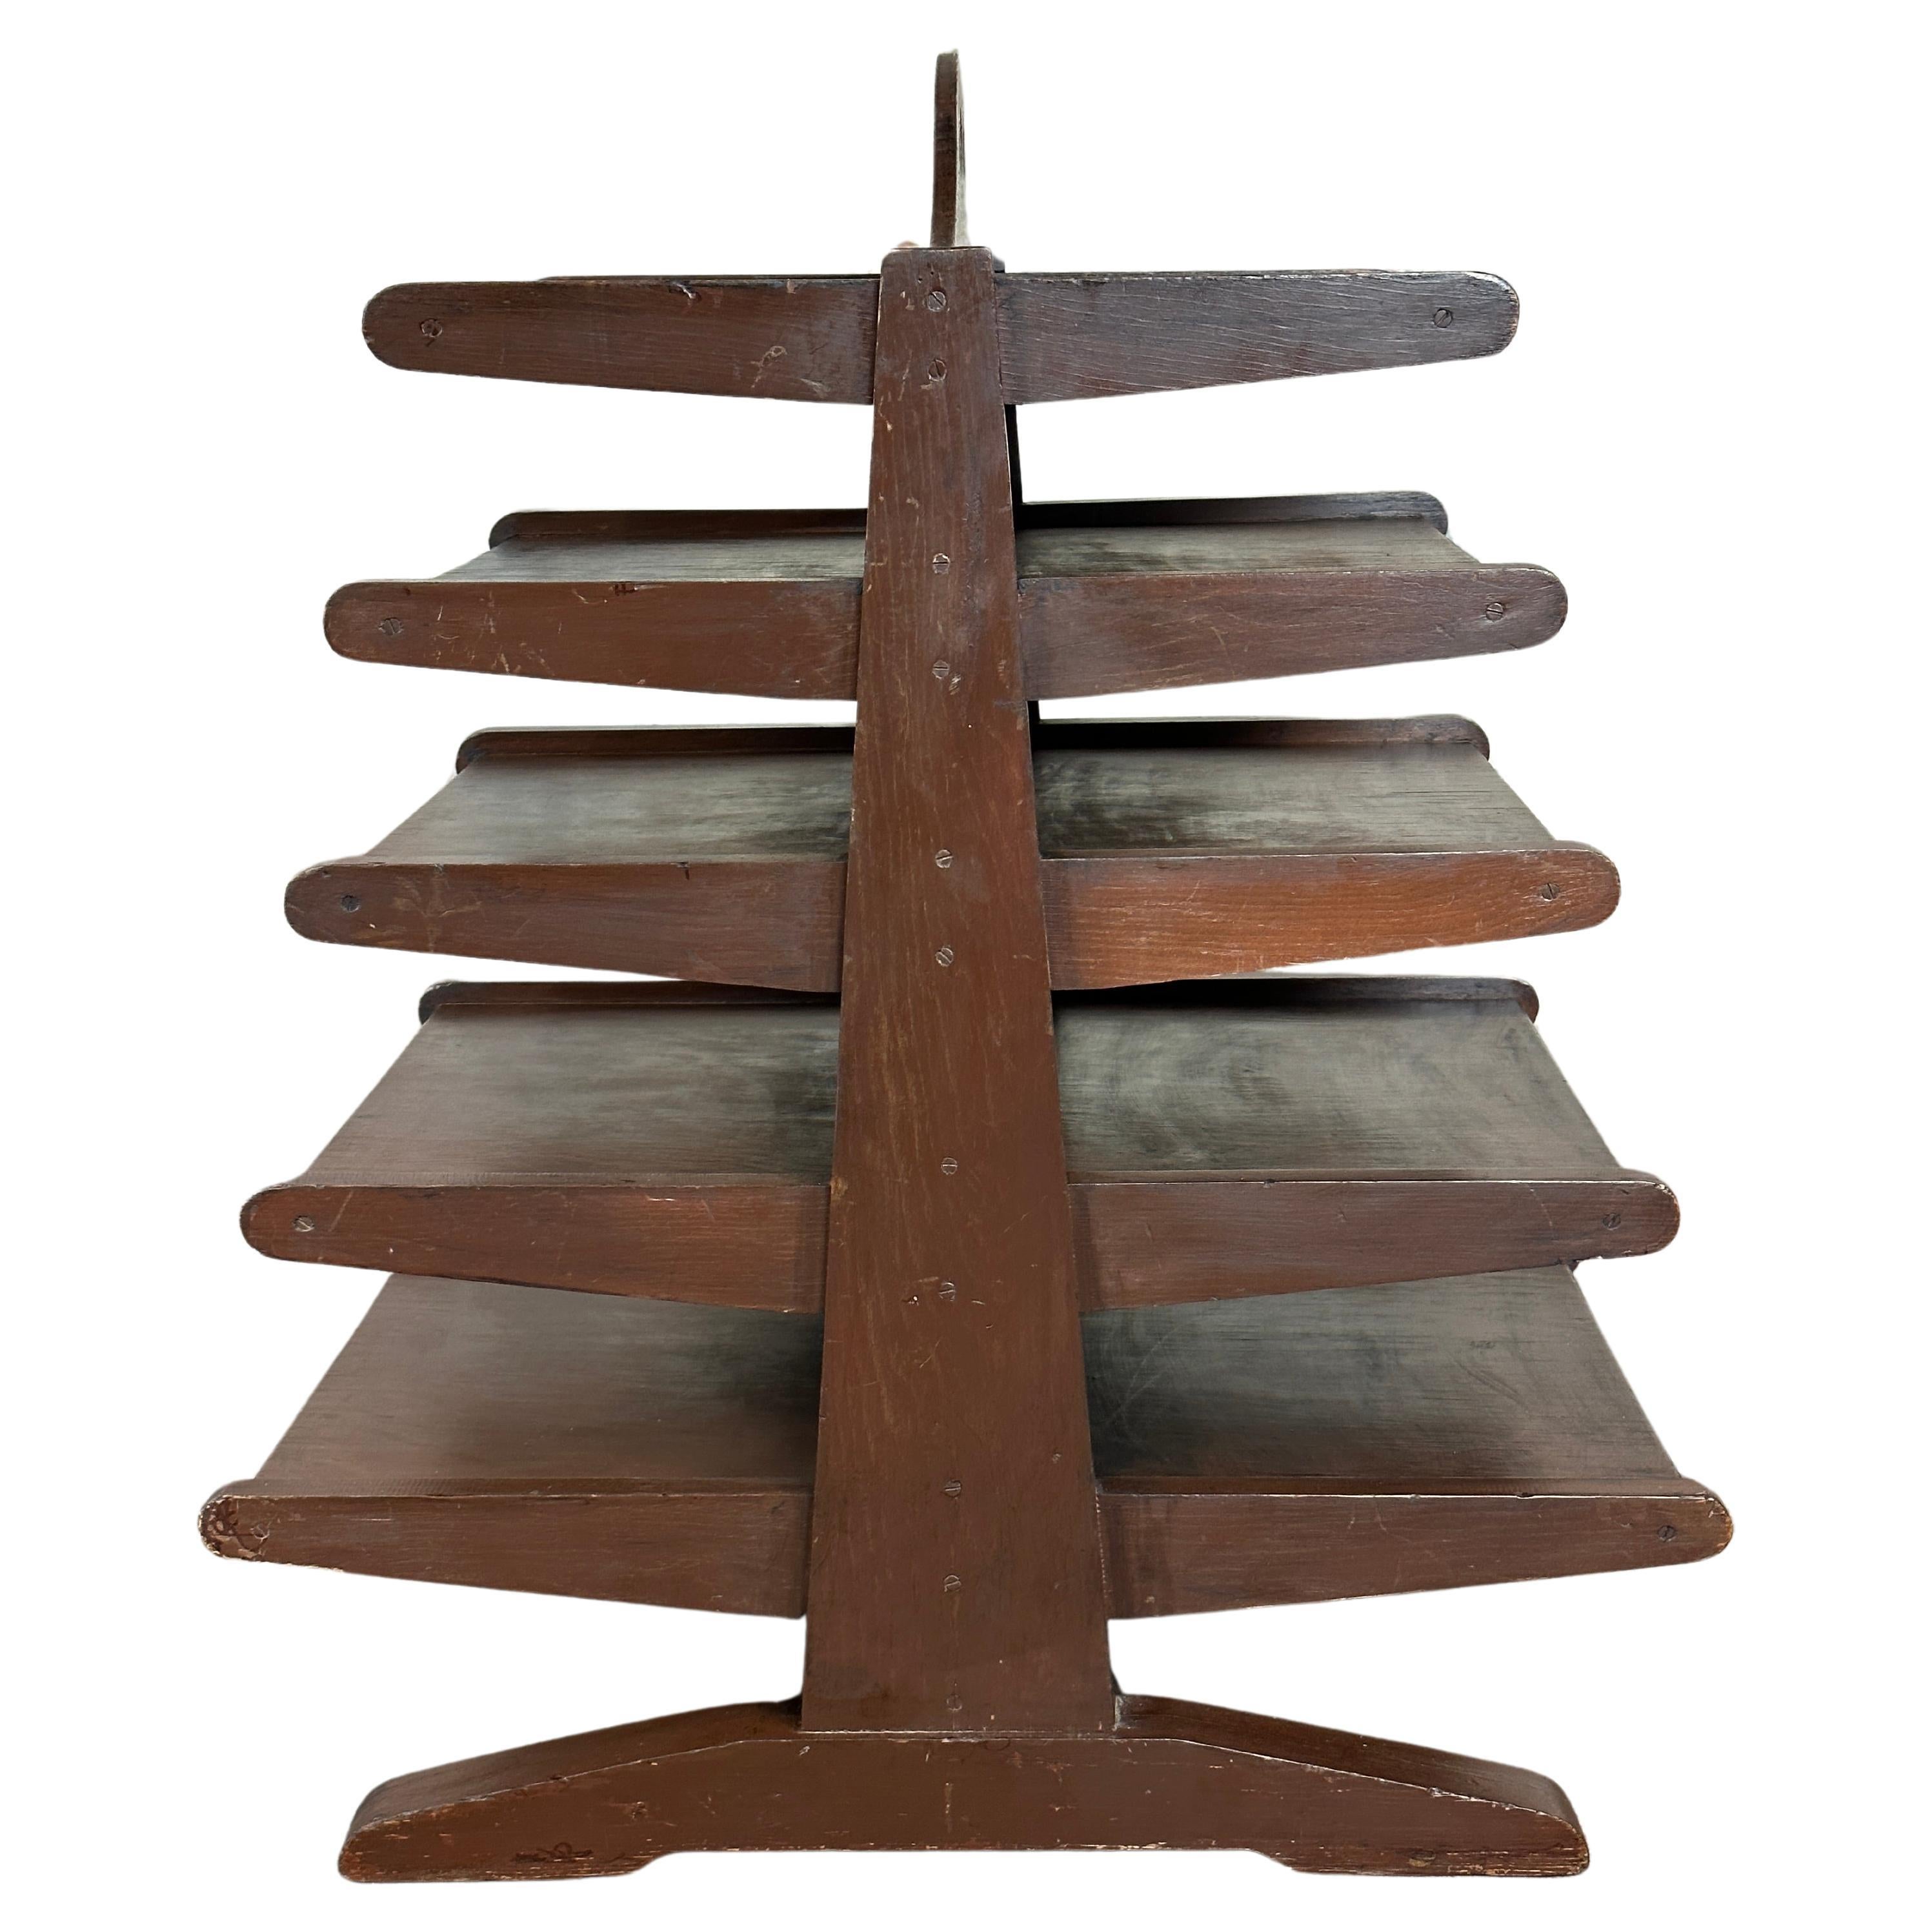 This is a The 1950s Studio Craft Magazine Tree embodies the DIY Dunbar style, reminiscent of the iconic designs by Edward Wormley. This rustic piece stands proud in its original dark walnut stained wax finish, capturing the essence of the era. This